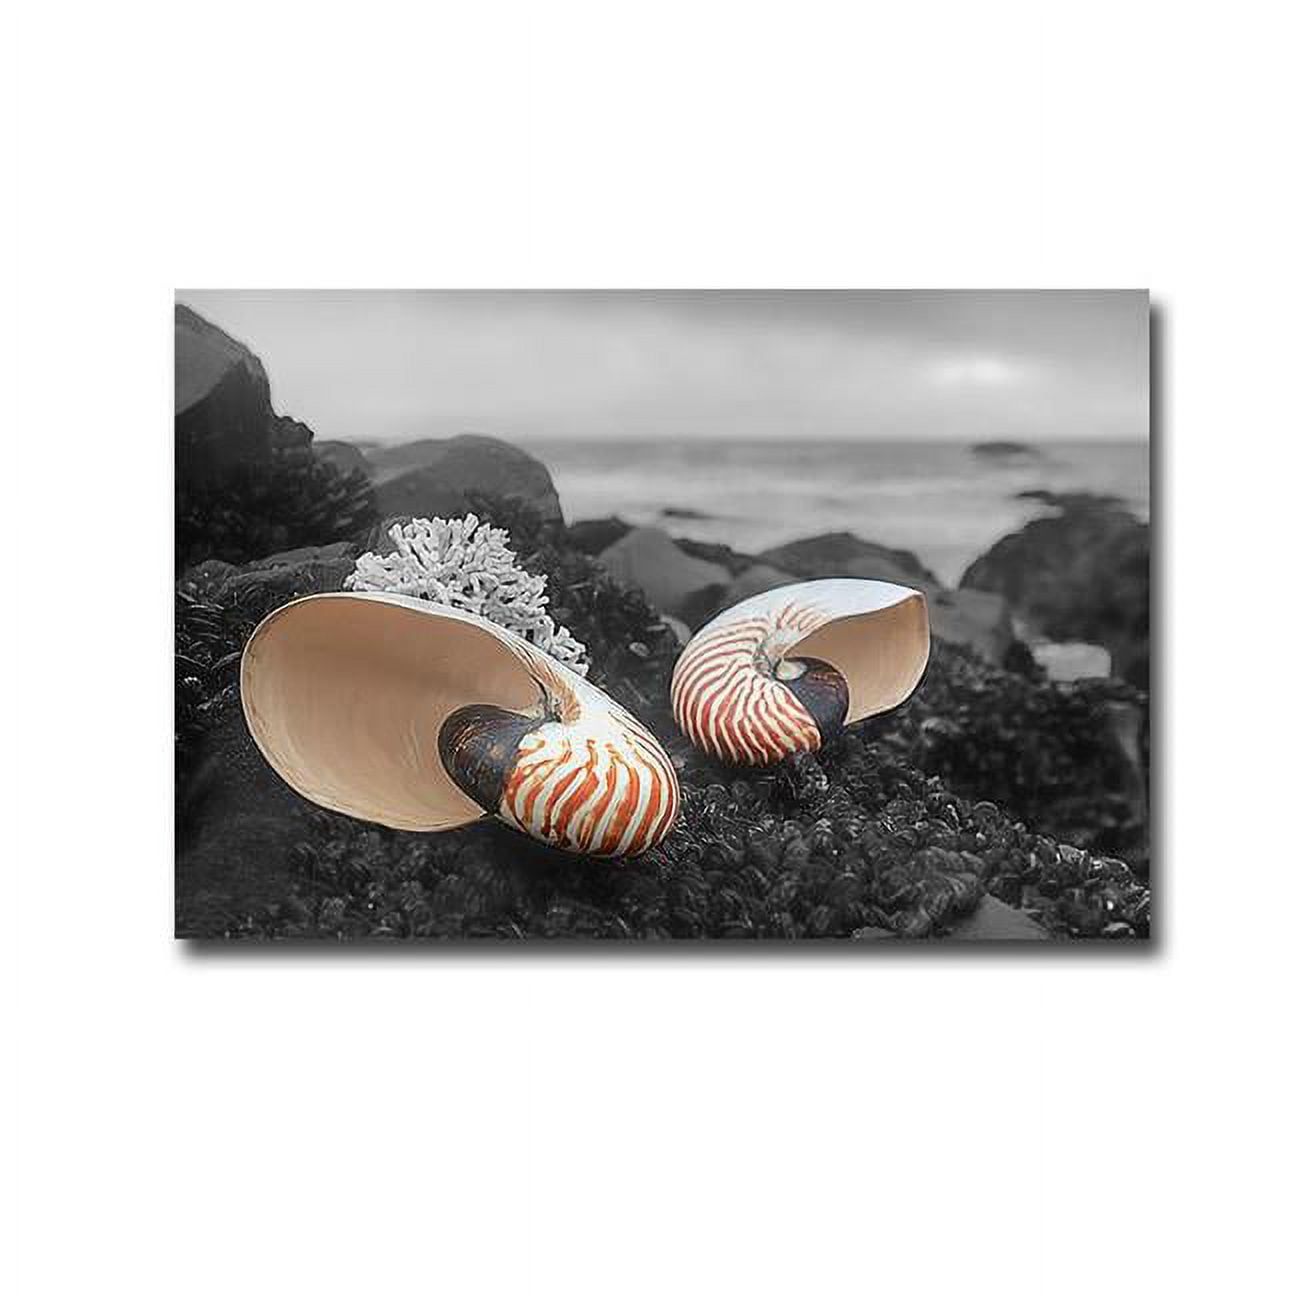 1218e867ig Crescent Beach Shells No.2 By Alan Blaustein Premium Gallery-wrapped Canvas Giclee Art - 12 X 18 X 1.5 In.